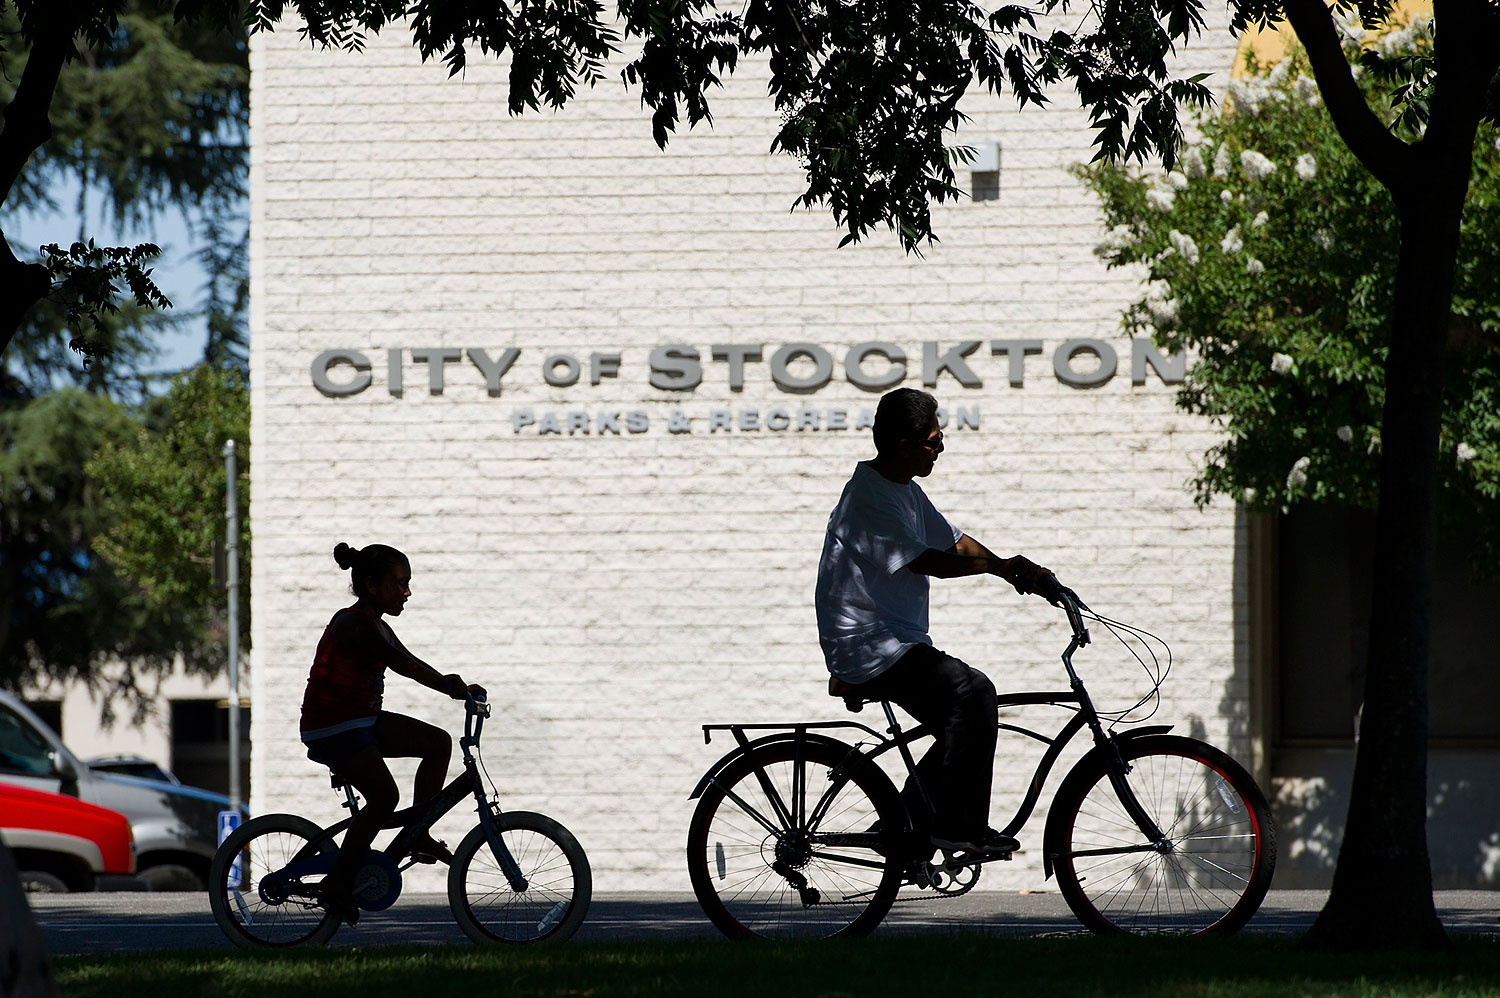 Pedestrians ride their bicycles along the street in Stockton, California, U.S., on June 14, 2012. (David Paul Morris—Bloomberg/Getty Images)